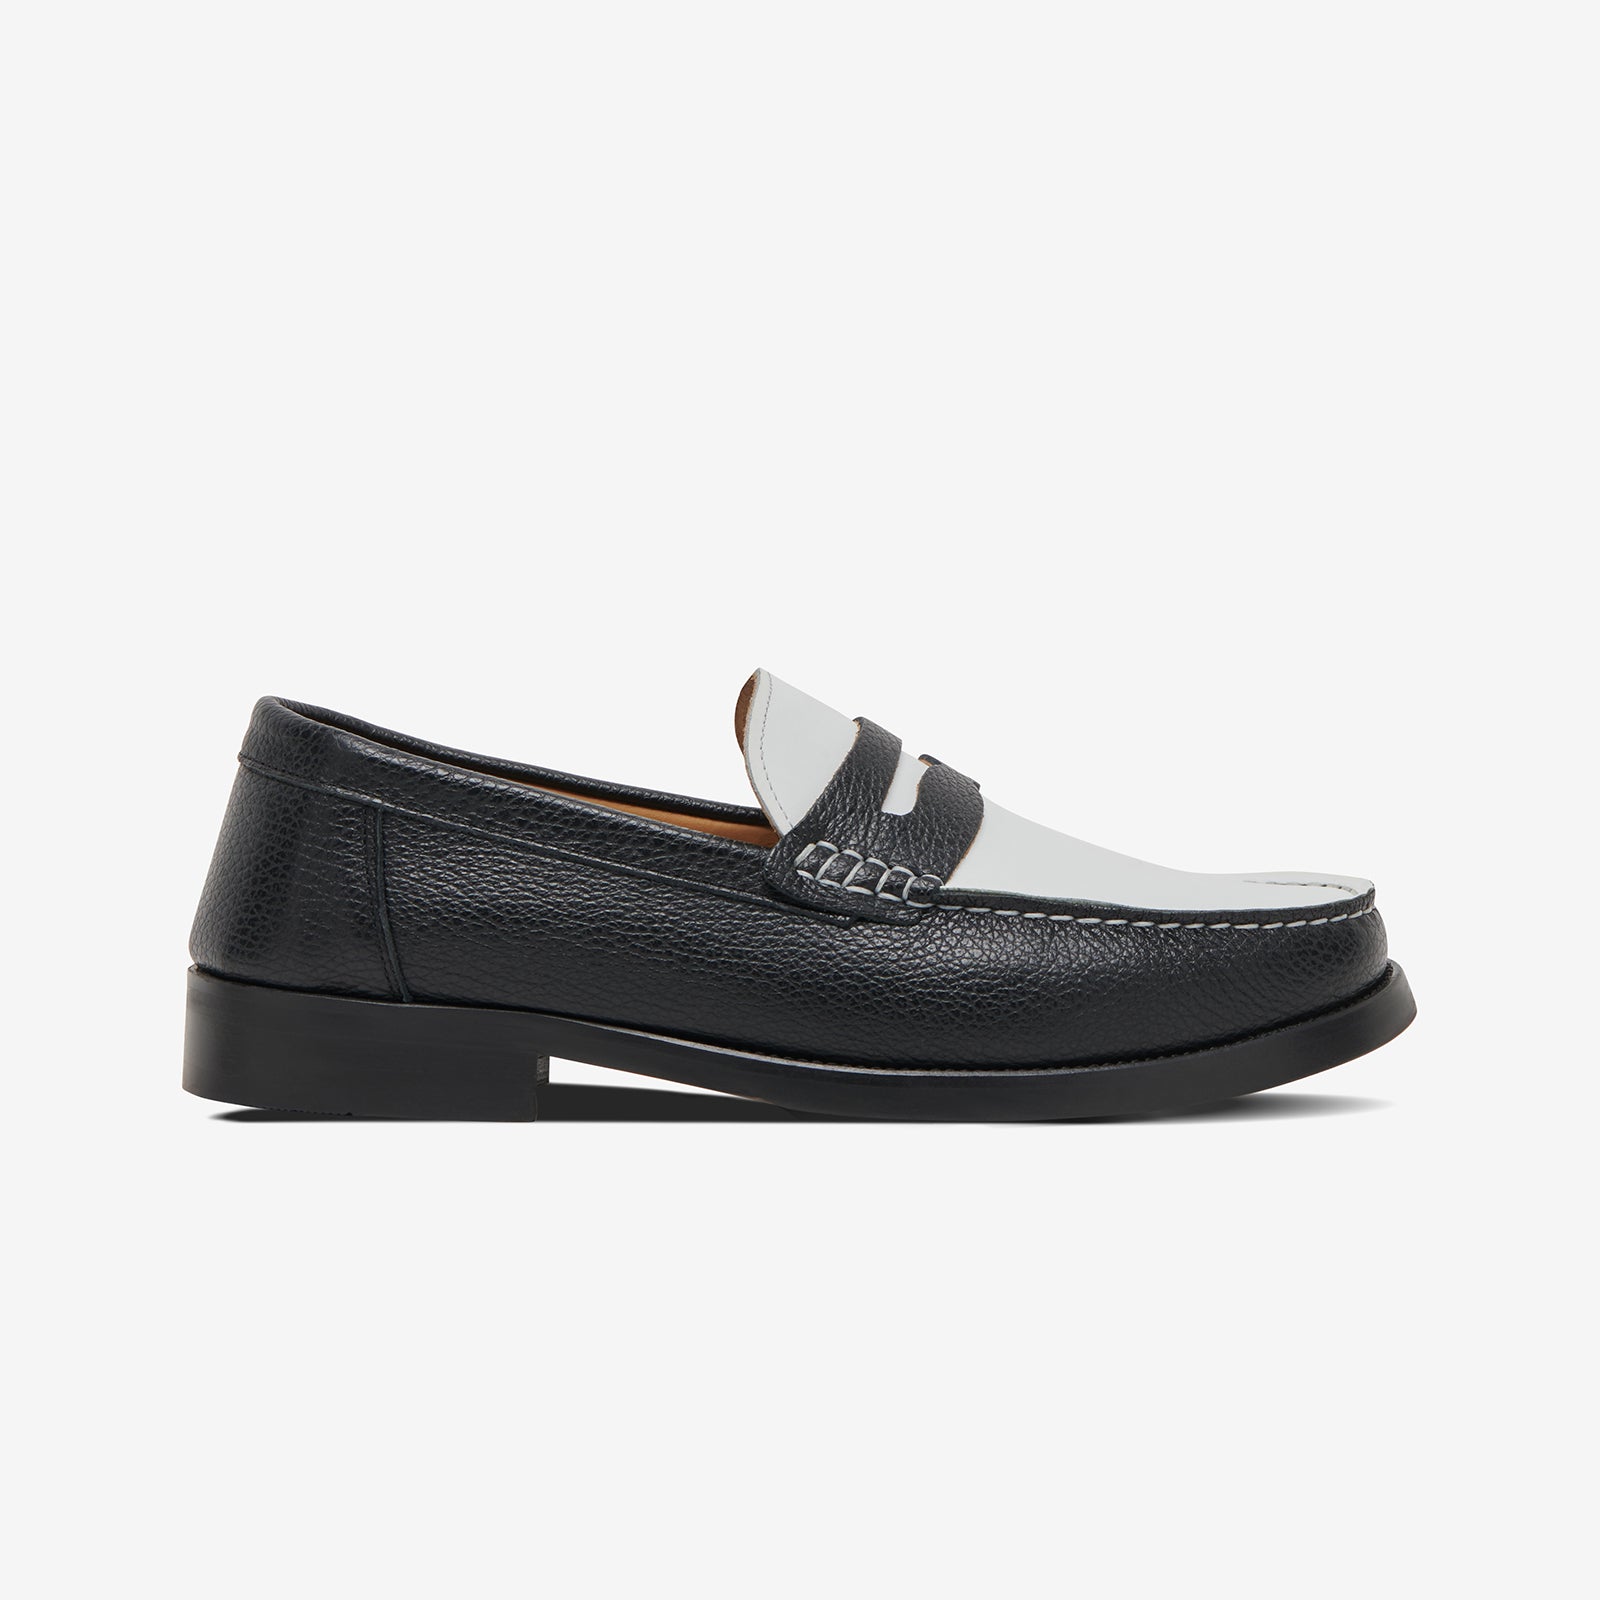 The Essex Penny Loafer - Black/White